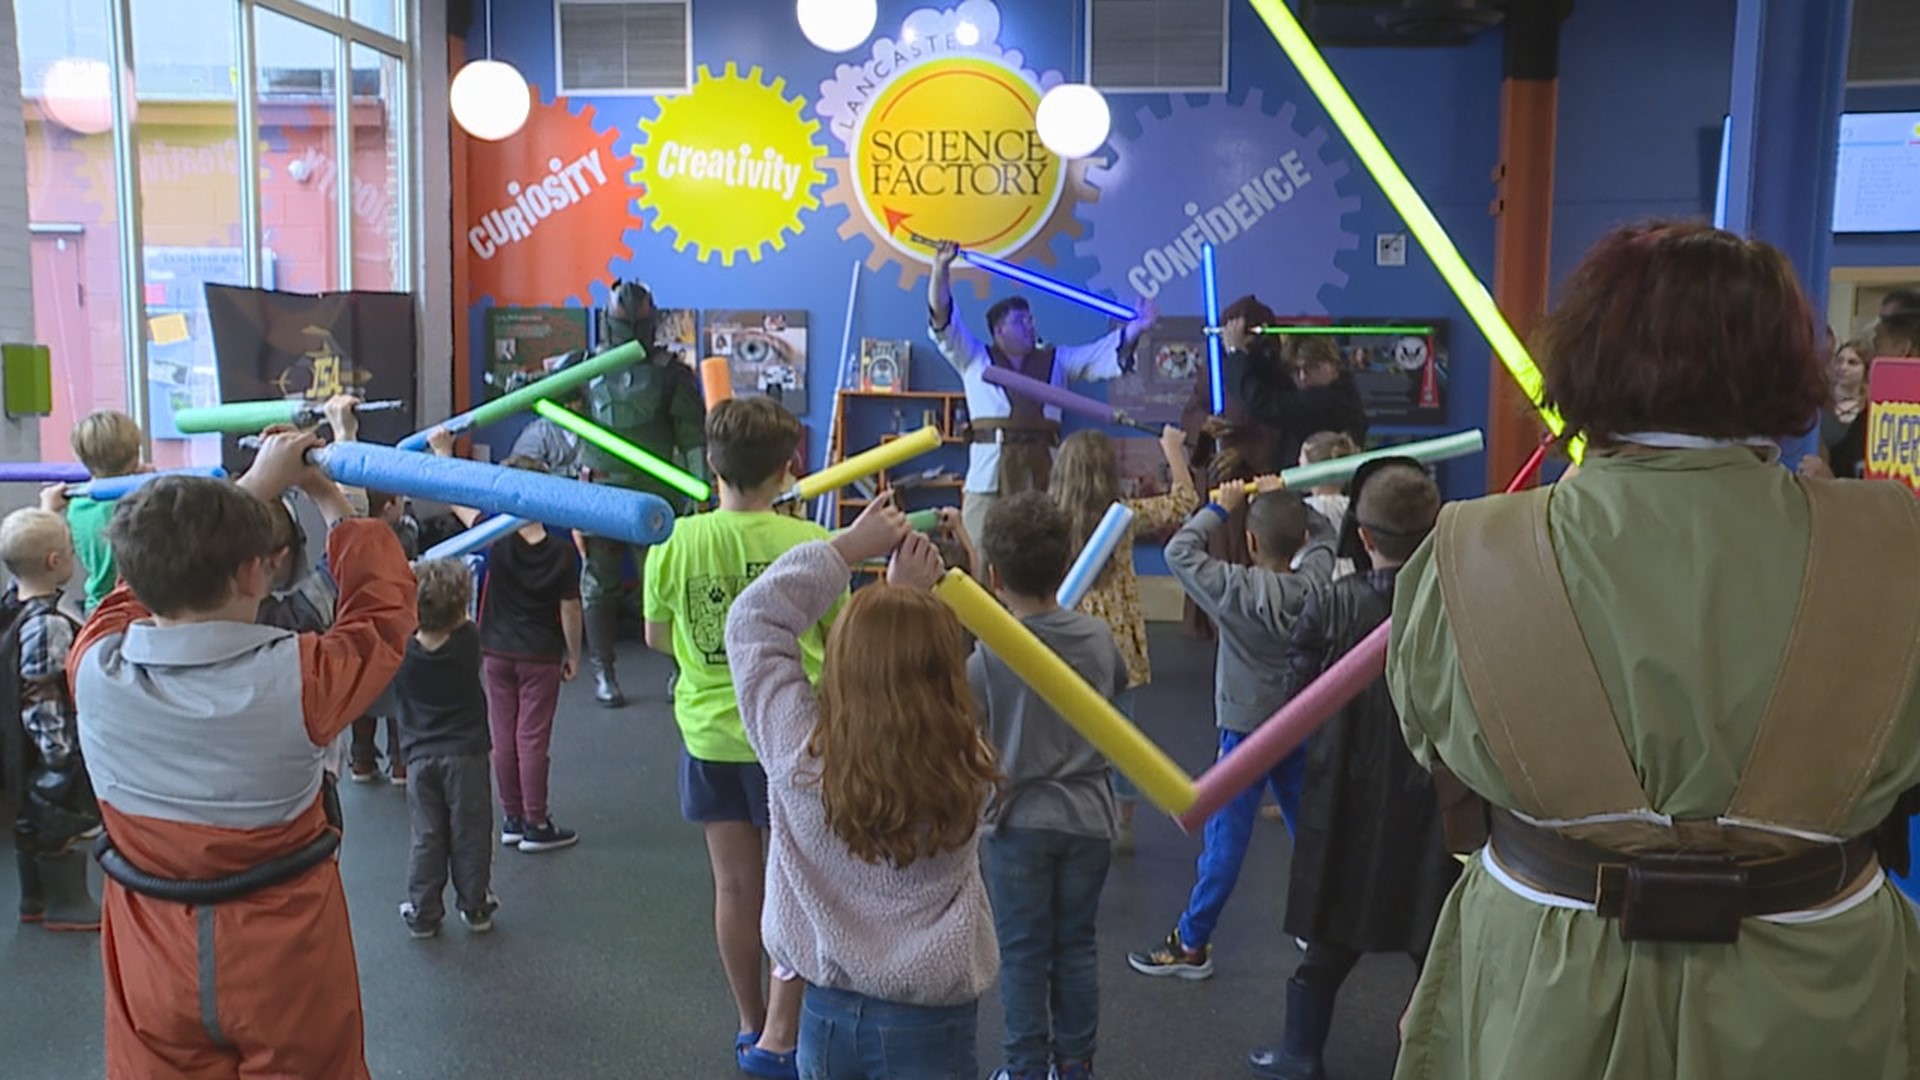 The Lancaster Science Factory held 'The Force Returns' on Sunday, which is an annual, interactive "Star Wars"-themed event aimed to encourage creativity in students.